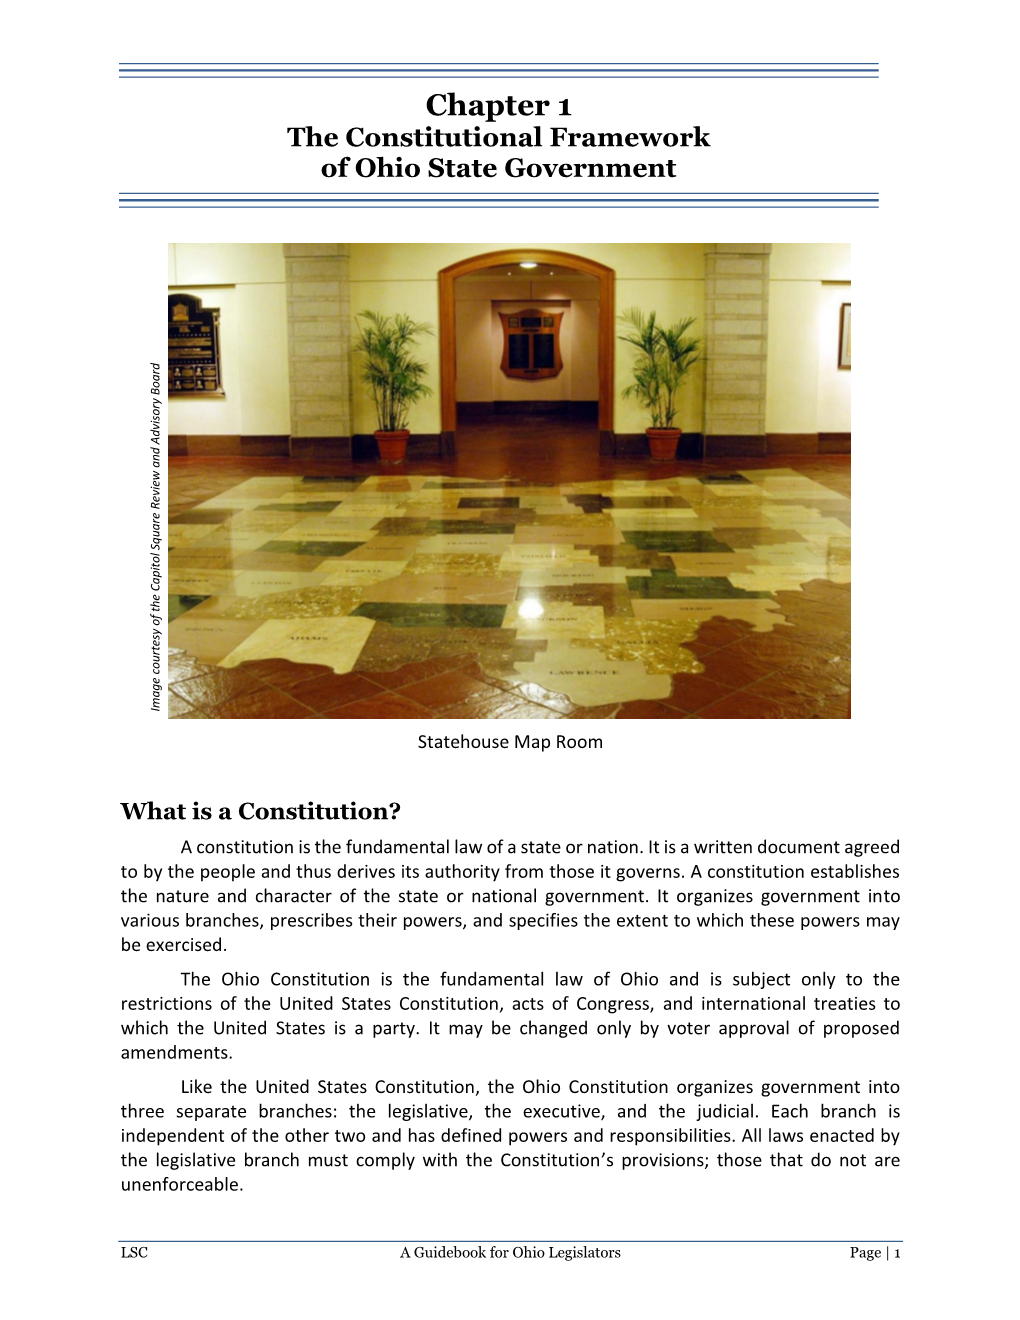 Chapter 1 the Constitutional Framework of Ohio State Government